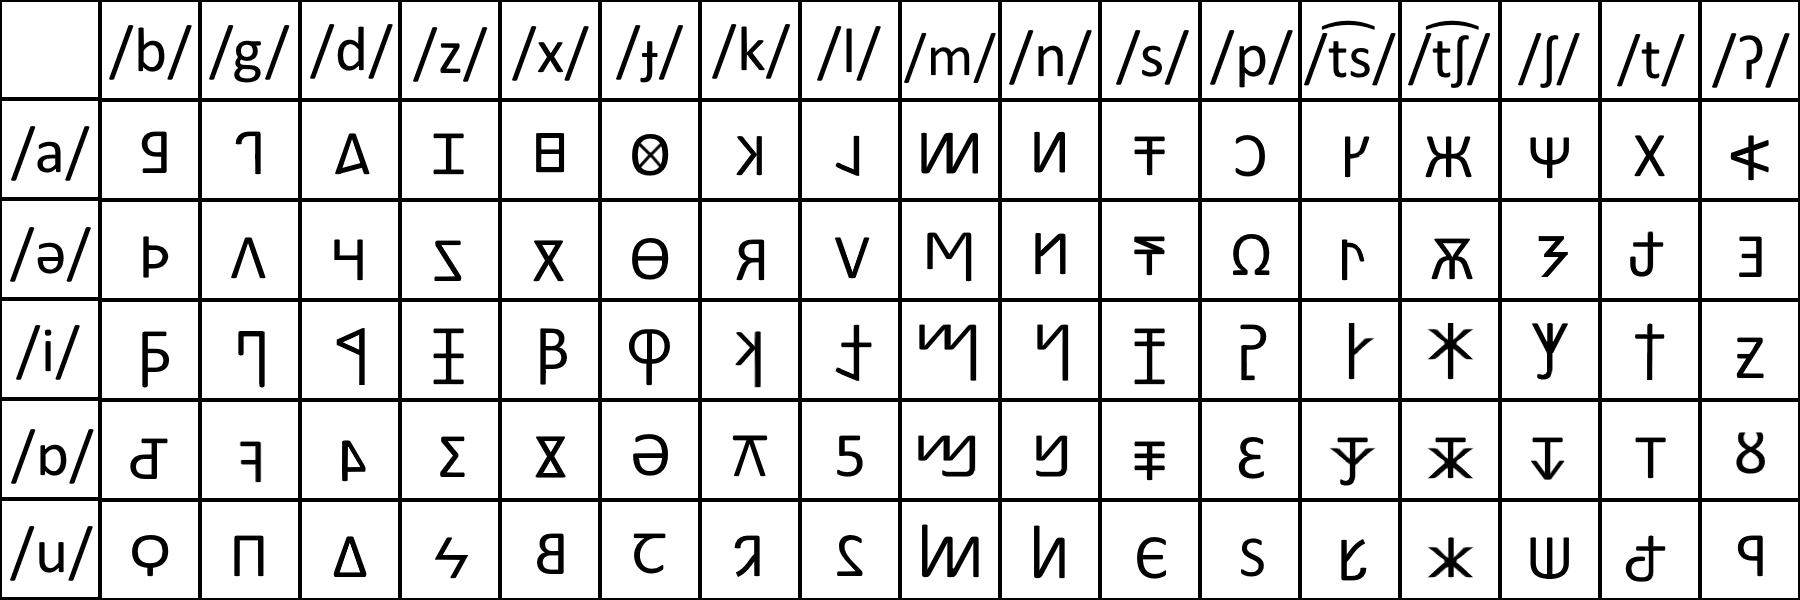 Discuss Everything About Conlang Fandom